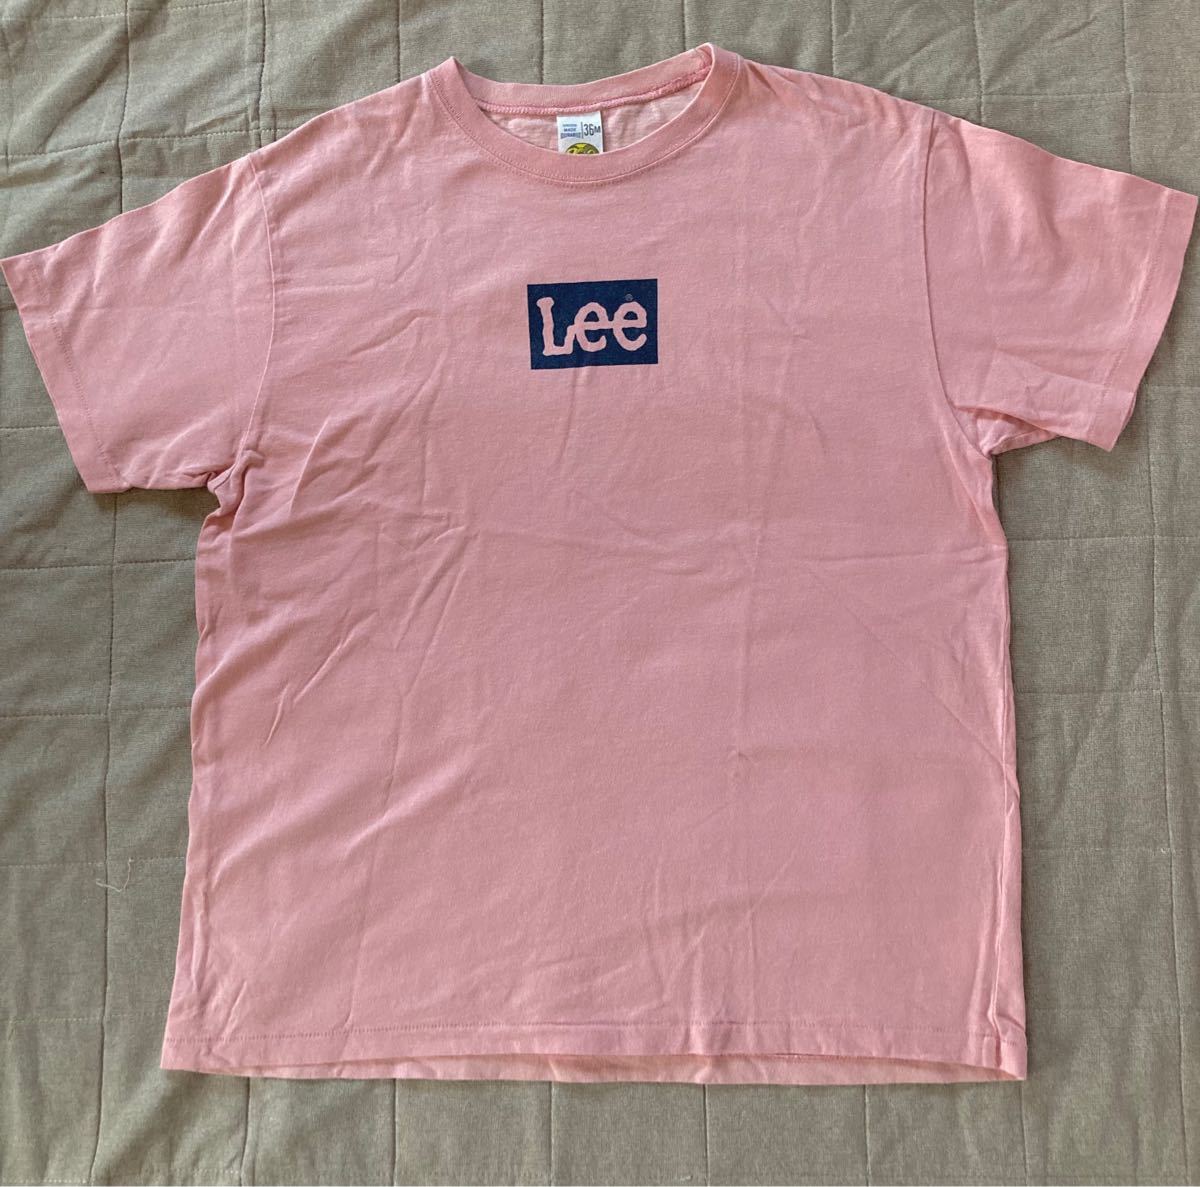 Lee Tシャツ　サーモンピンク　M〜L